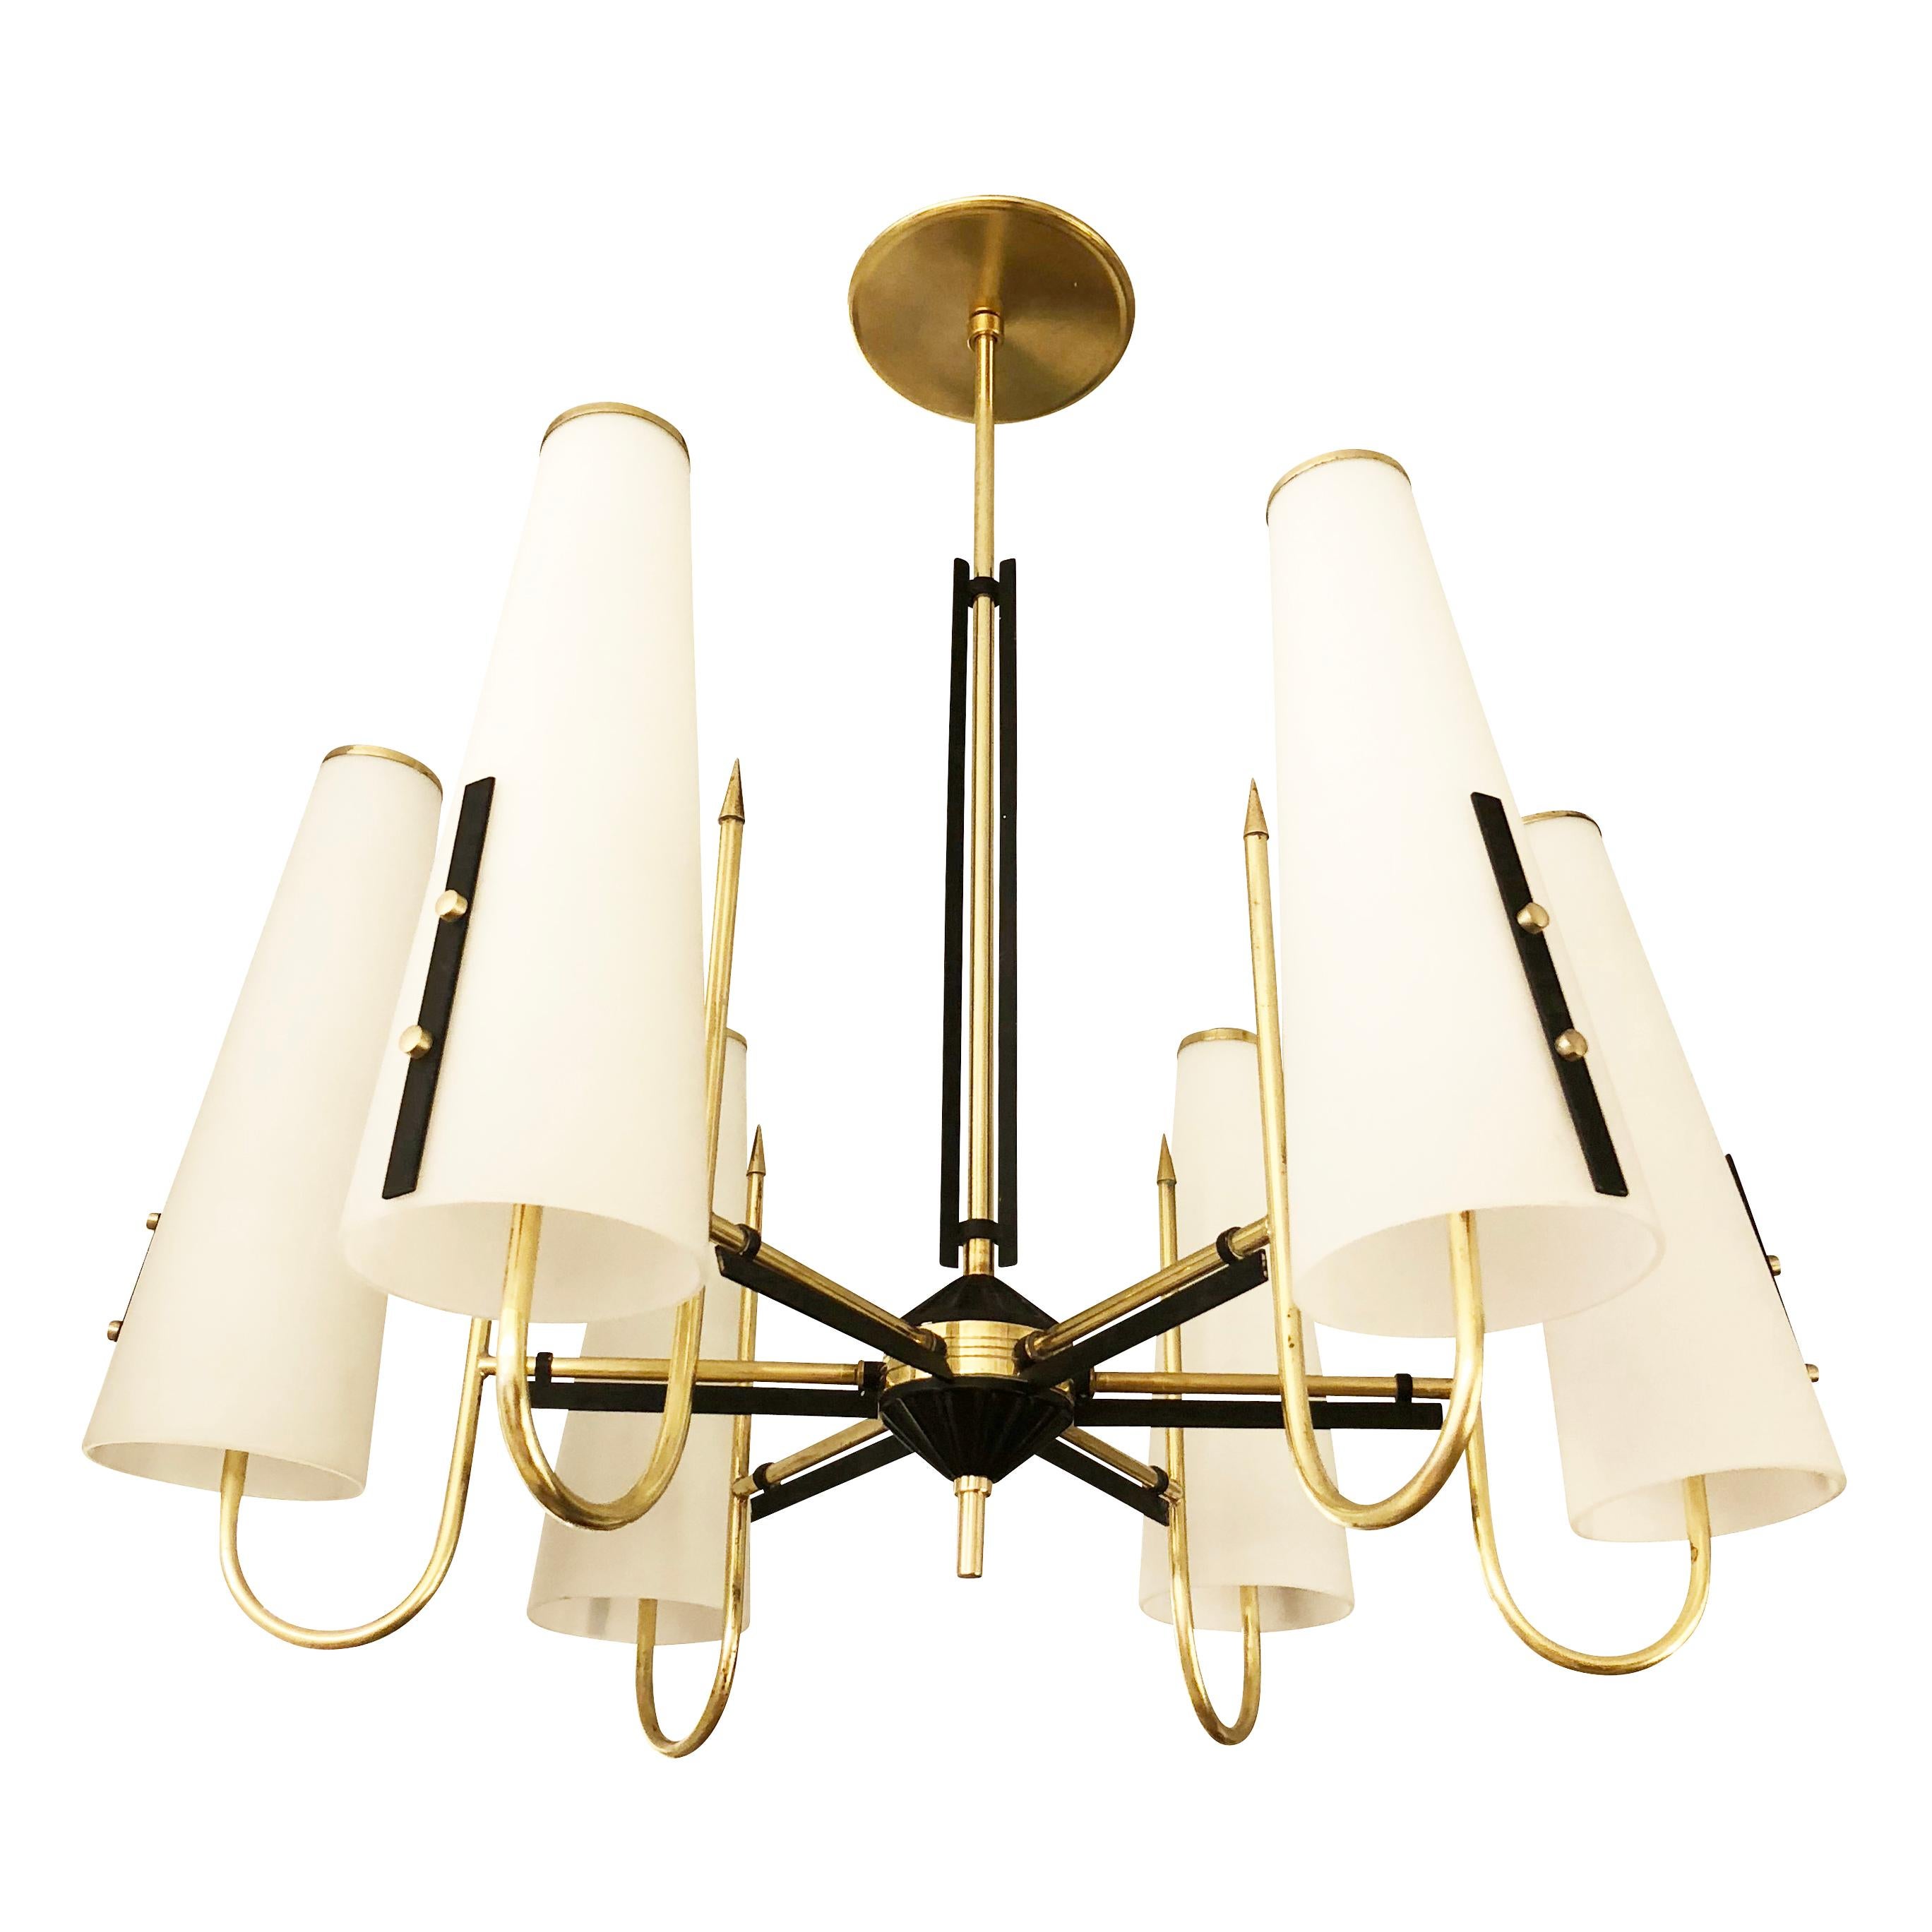 Midcentury chandelier attributed to Bruno Chiarini with six conical glass shades on brass and black lacquered frame. Height of stem can be adjusted as needed.

Condition: Excellent vintage condition, minor wear consistent with age and use. One